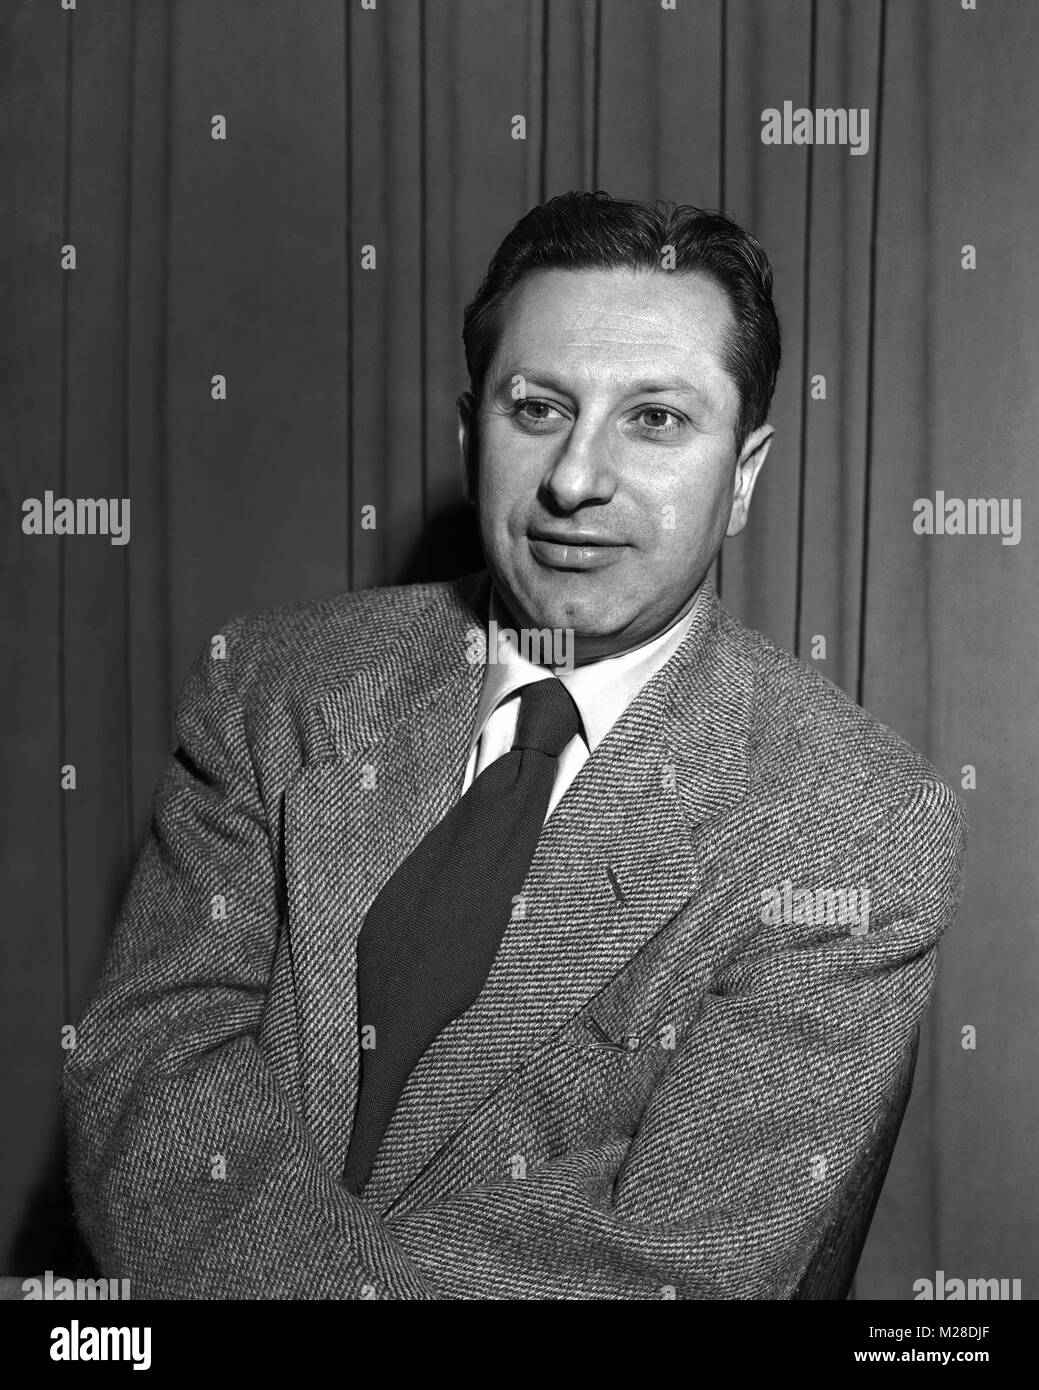 Studs Terkel an American author, historian, actor, and broadcaster. Received Pulitzer Prize for General Non-Fiction in 1985 for 'The Good War'. March 16, 1951. Stock Photo